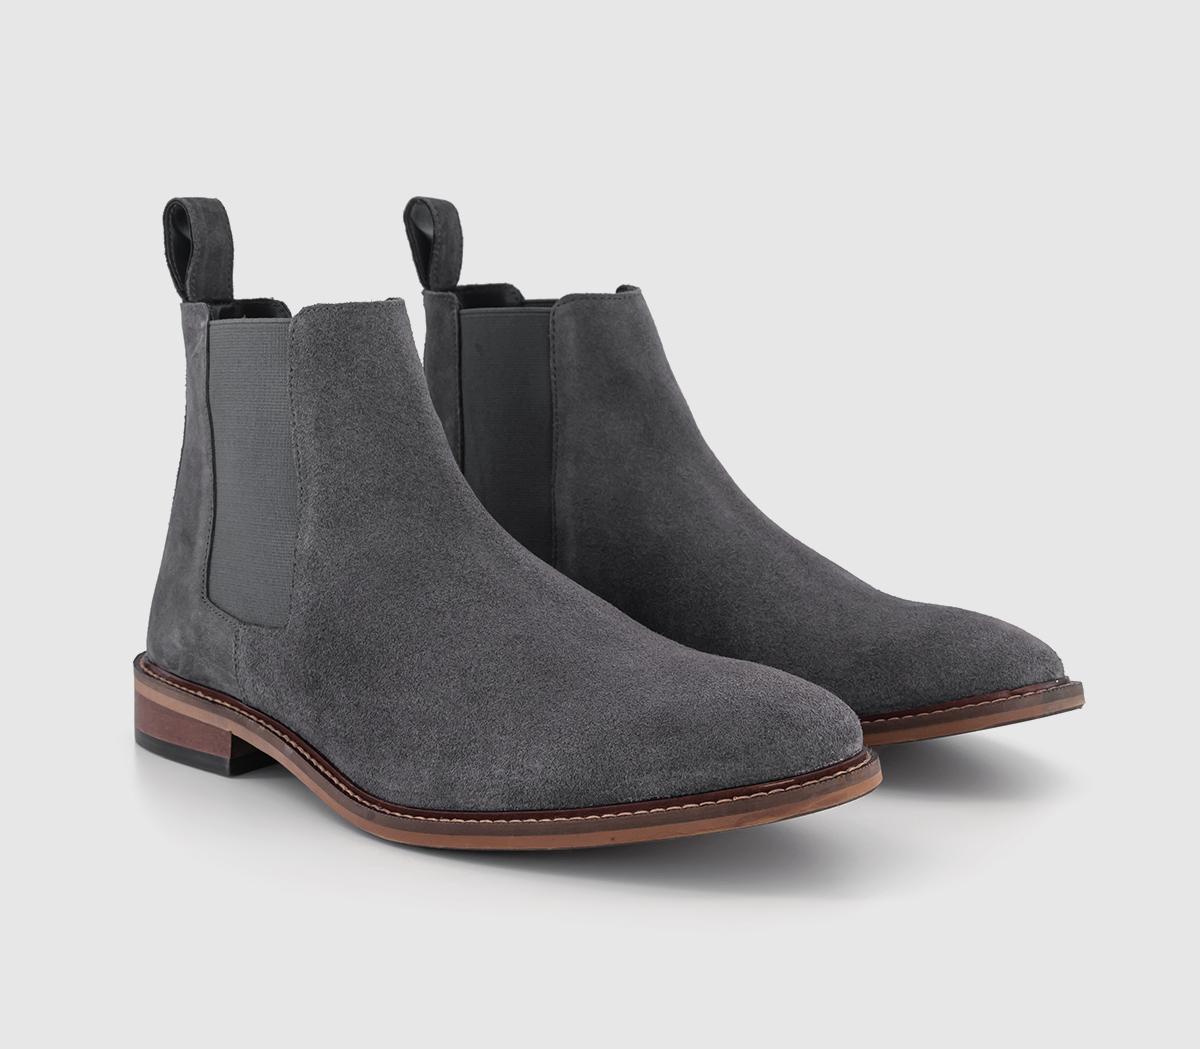 OFFICE Mens Beacon Chelsea Boots Grey Suede, 7